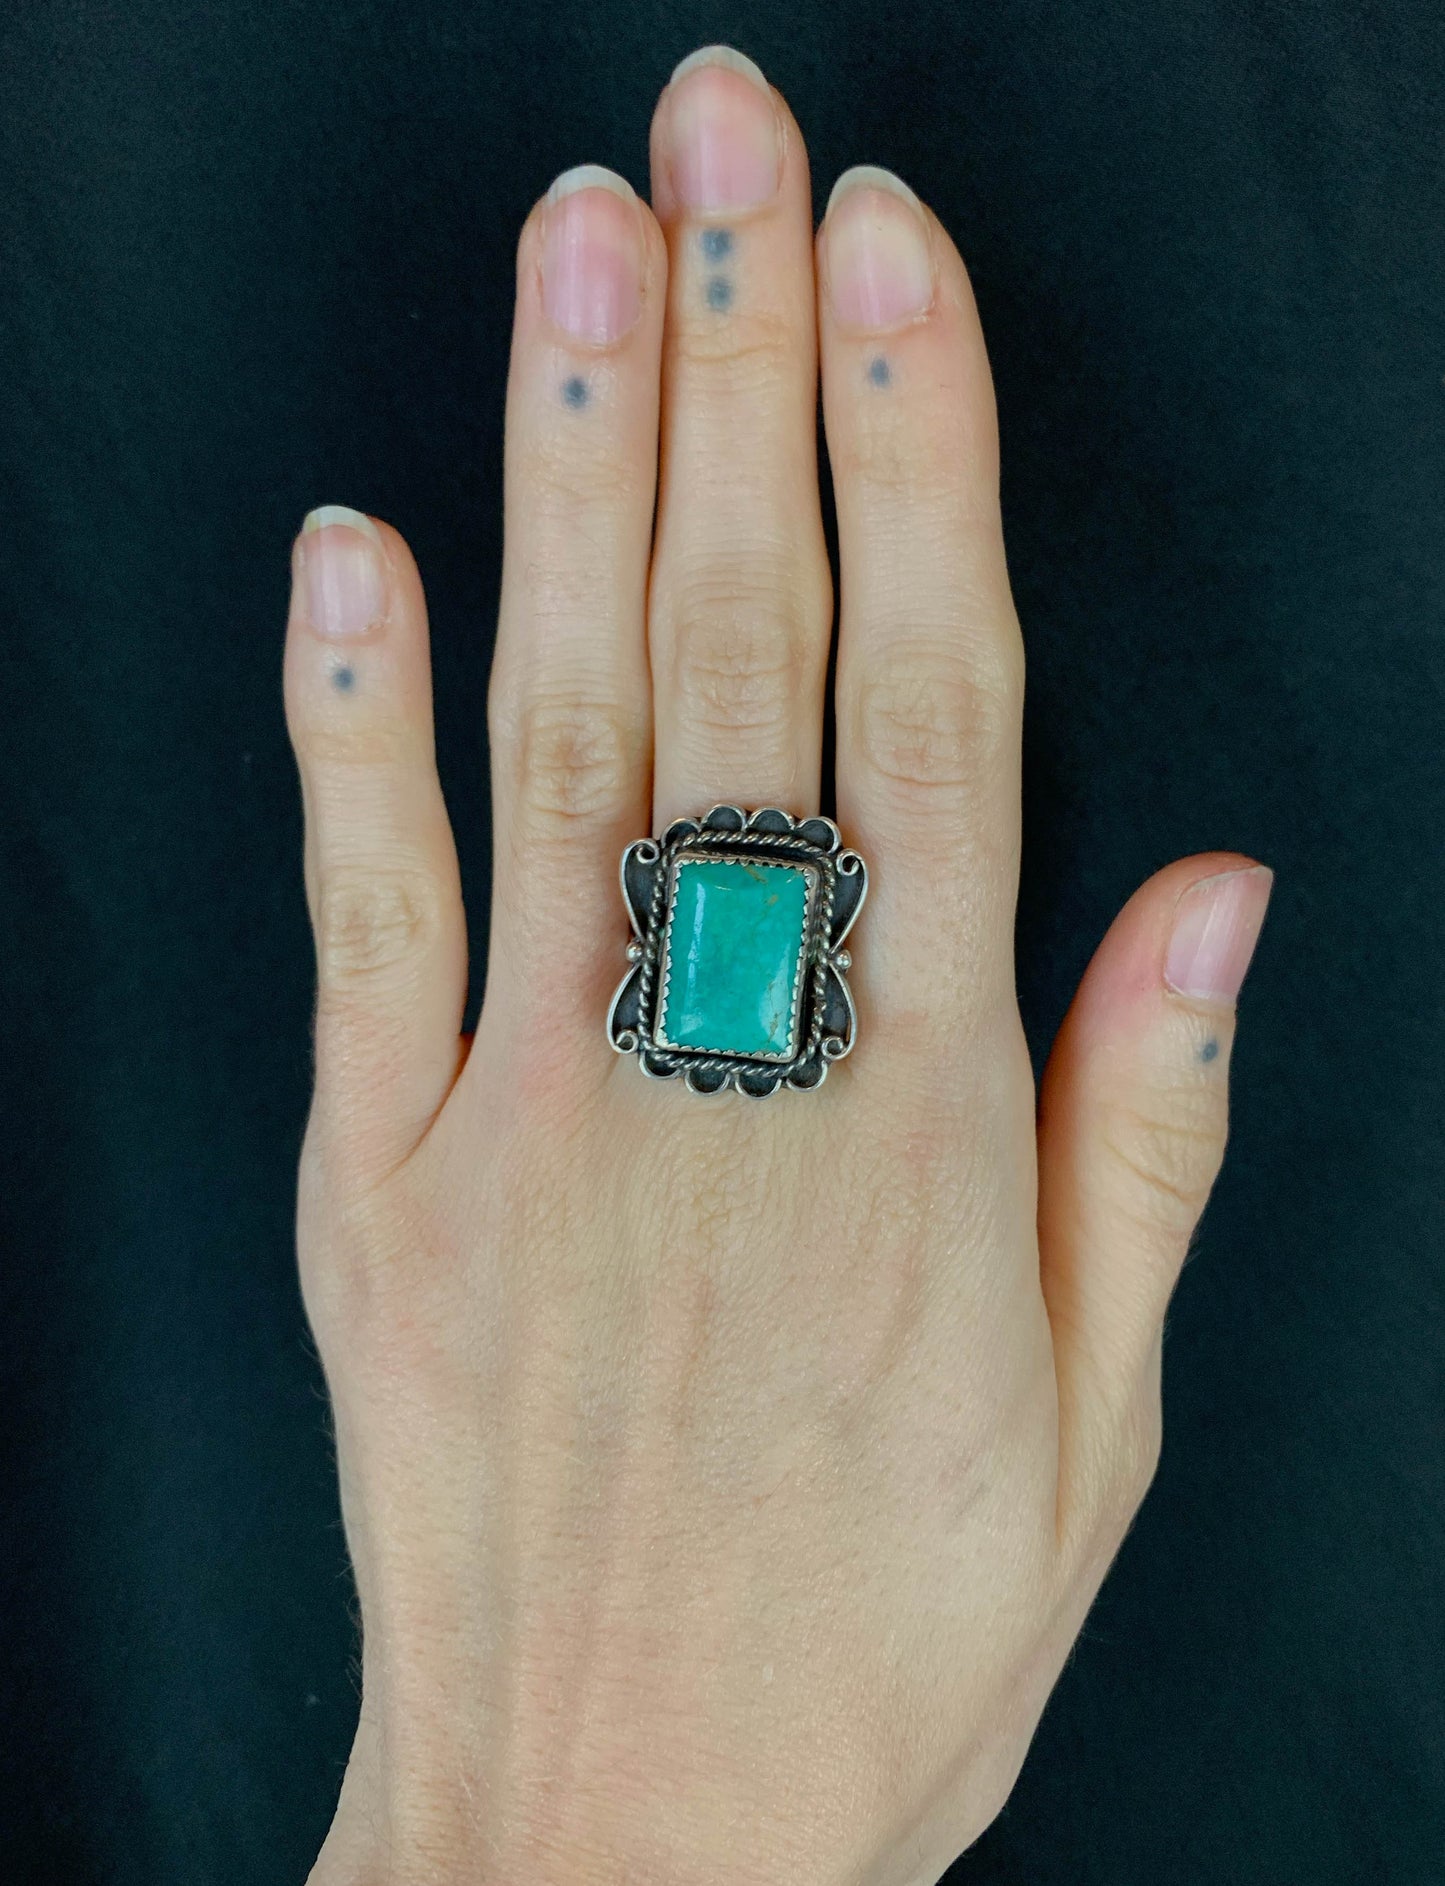 Vintage Sterling Silver Turquoise Square Ring - Size 9